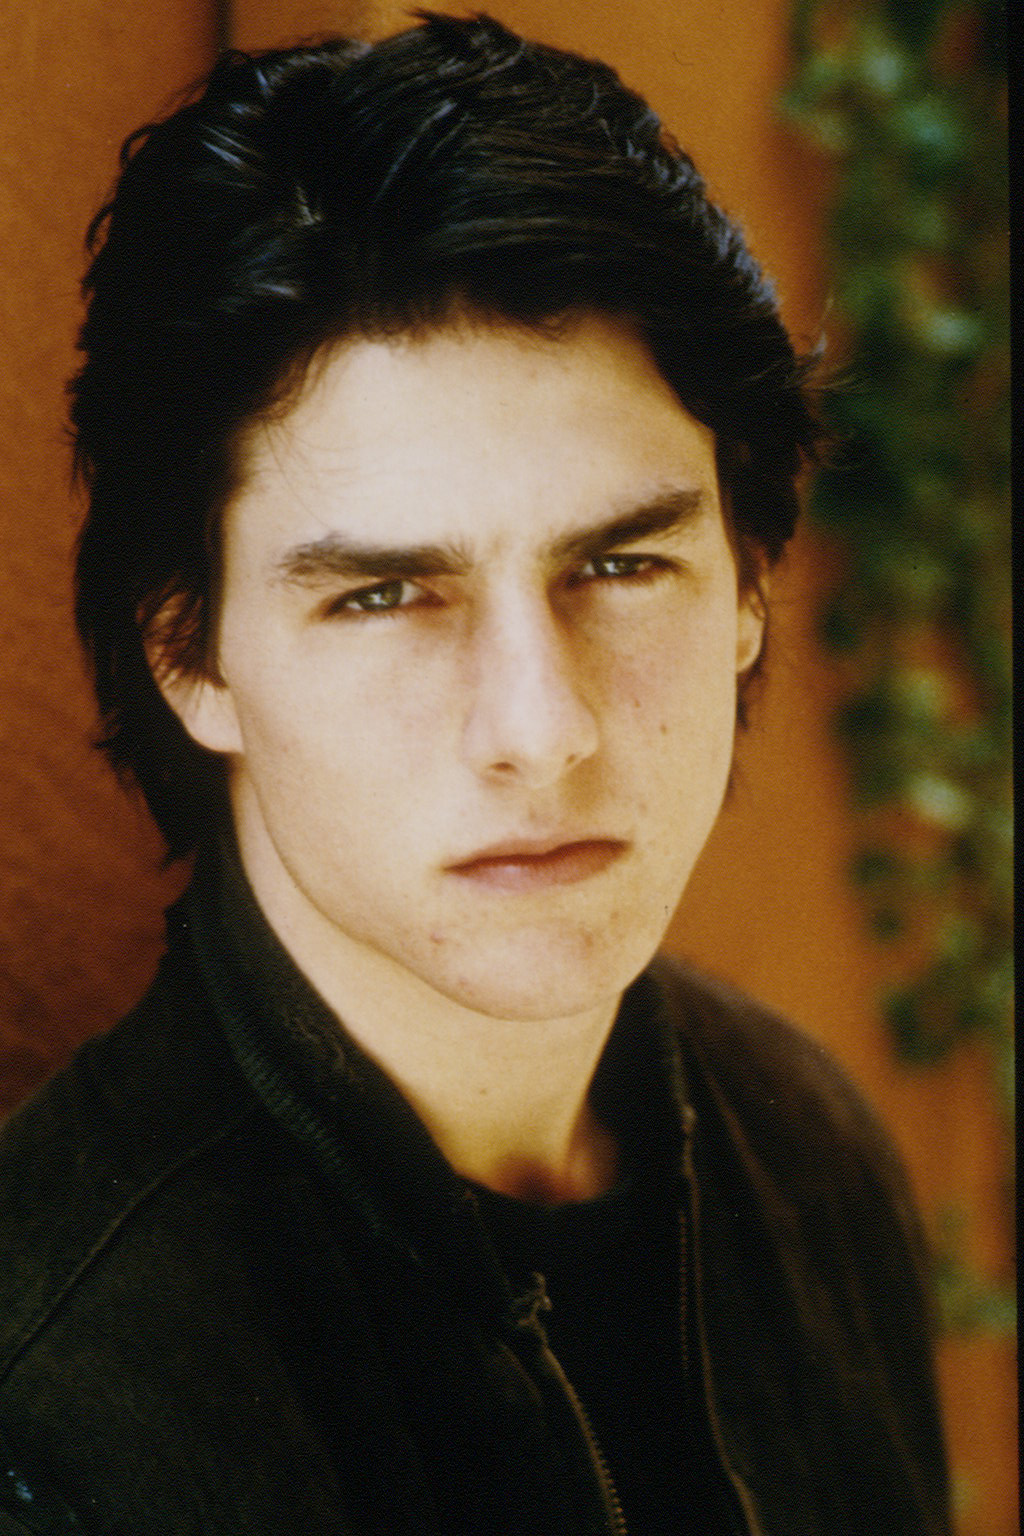 An undated image of Tom Cruise | Source: Getty Images